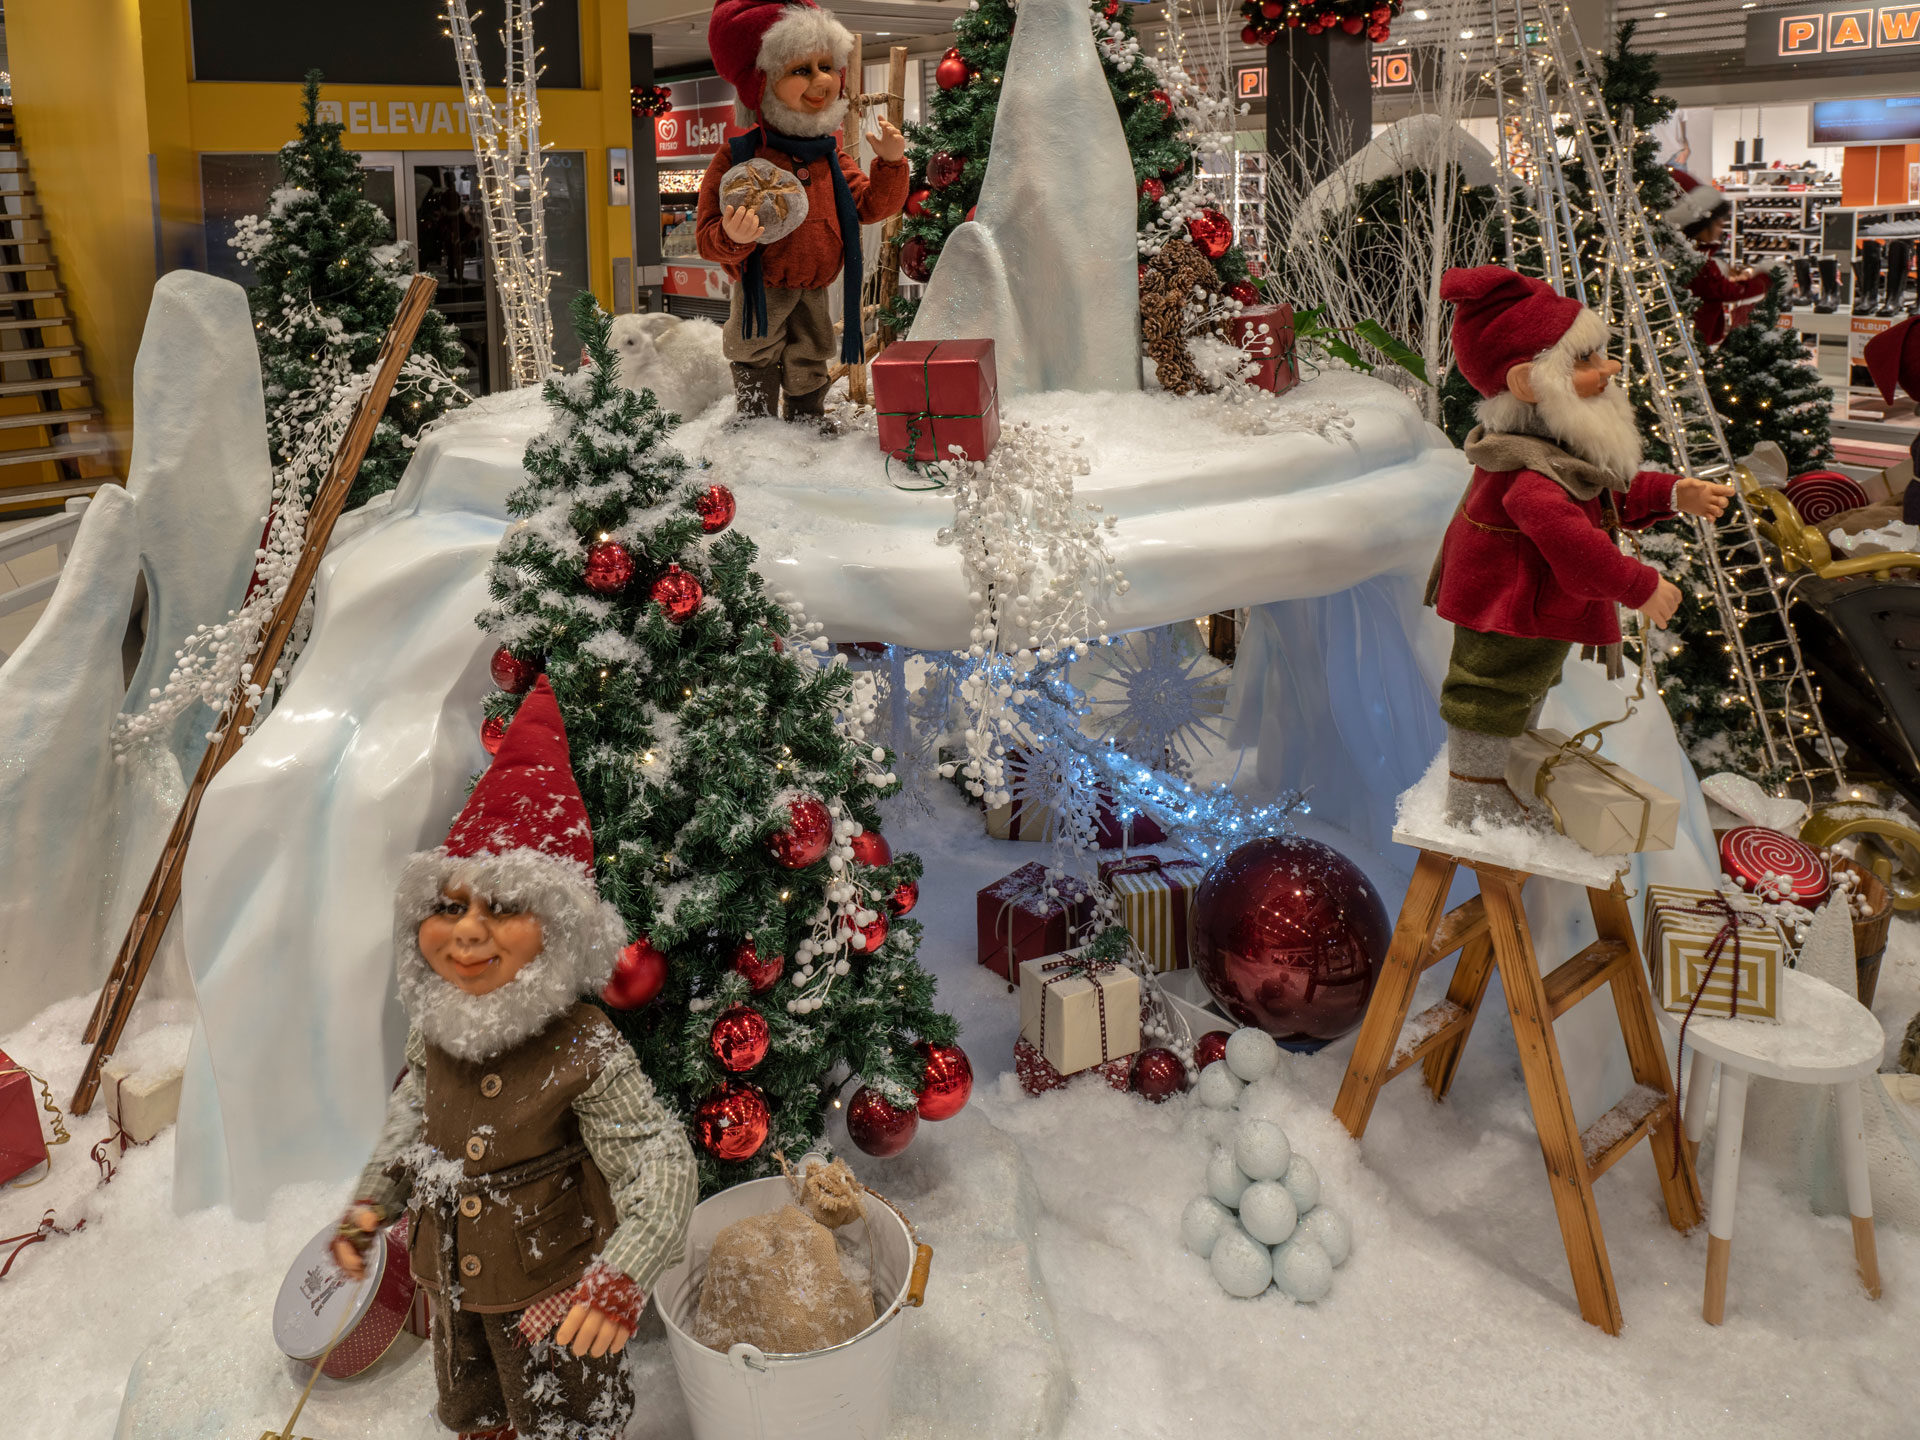 Christmas events and decorations in Kuala Lumpur's shopping malls